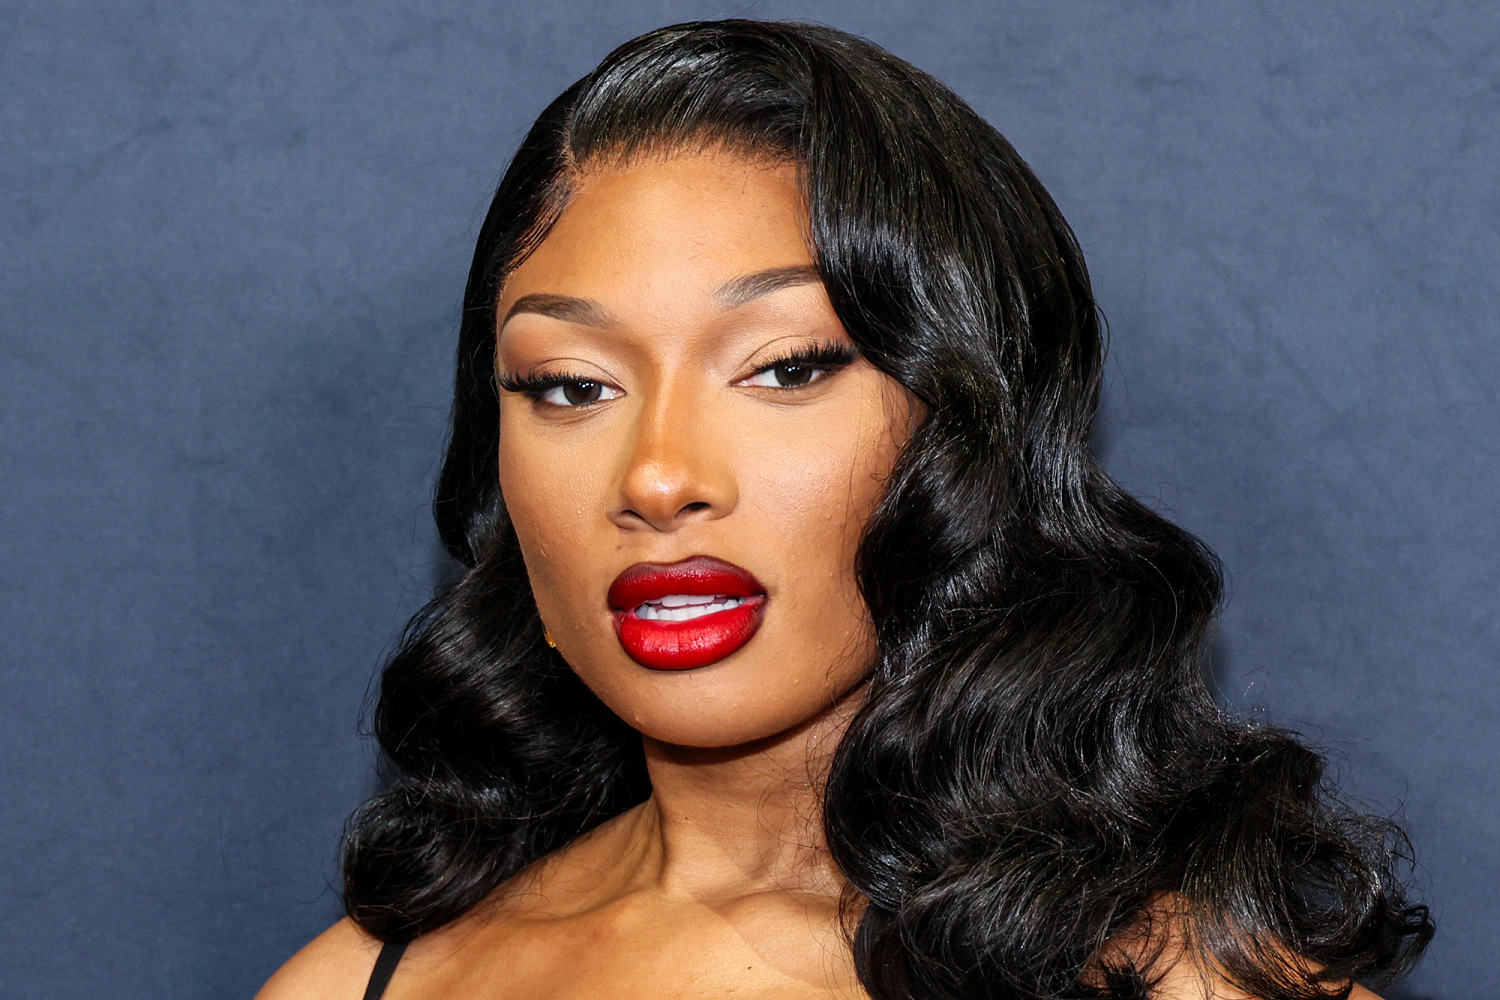 Former cameraman sues Megan Thee Stallion, alleging unpaid wages and harassment